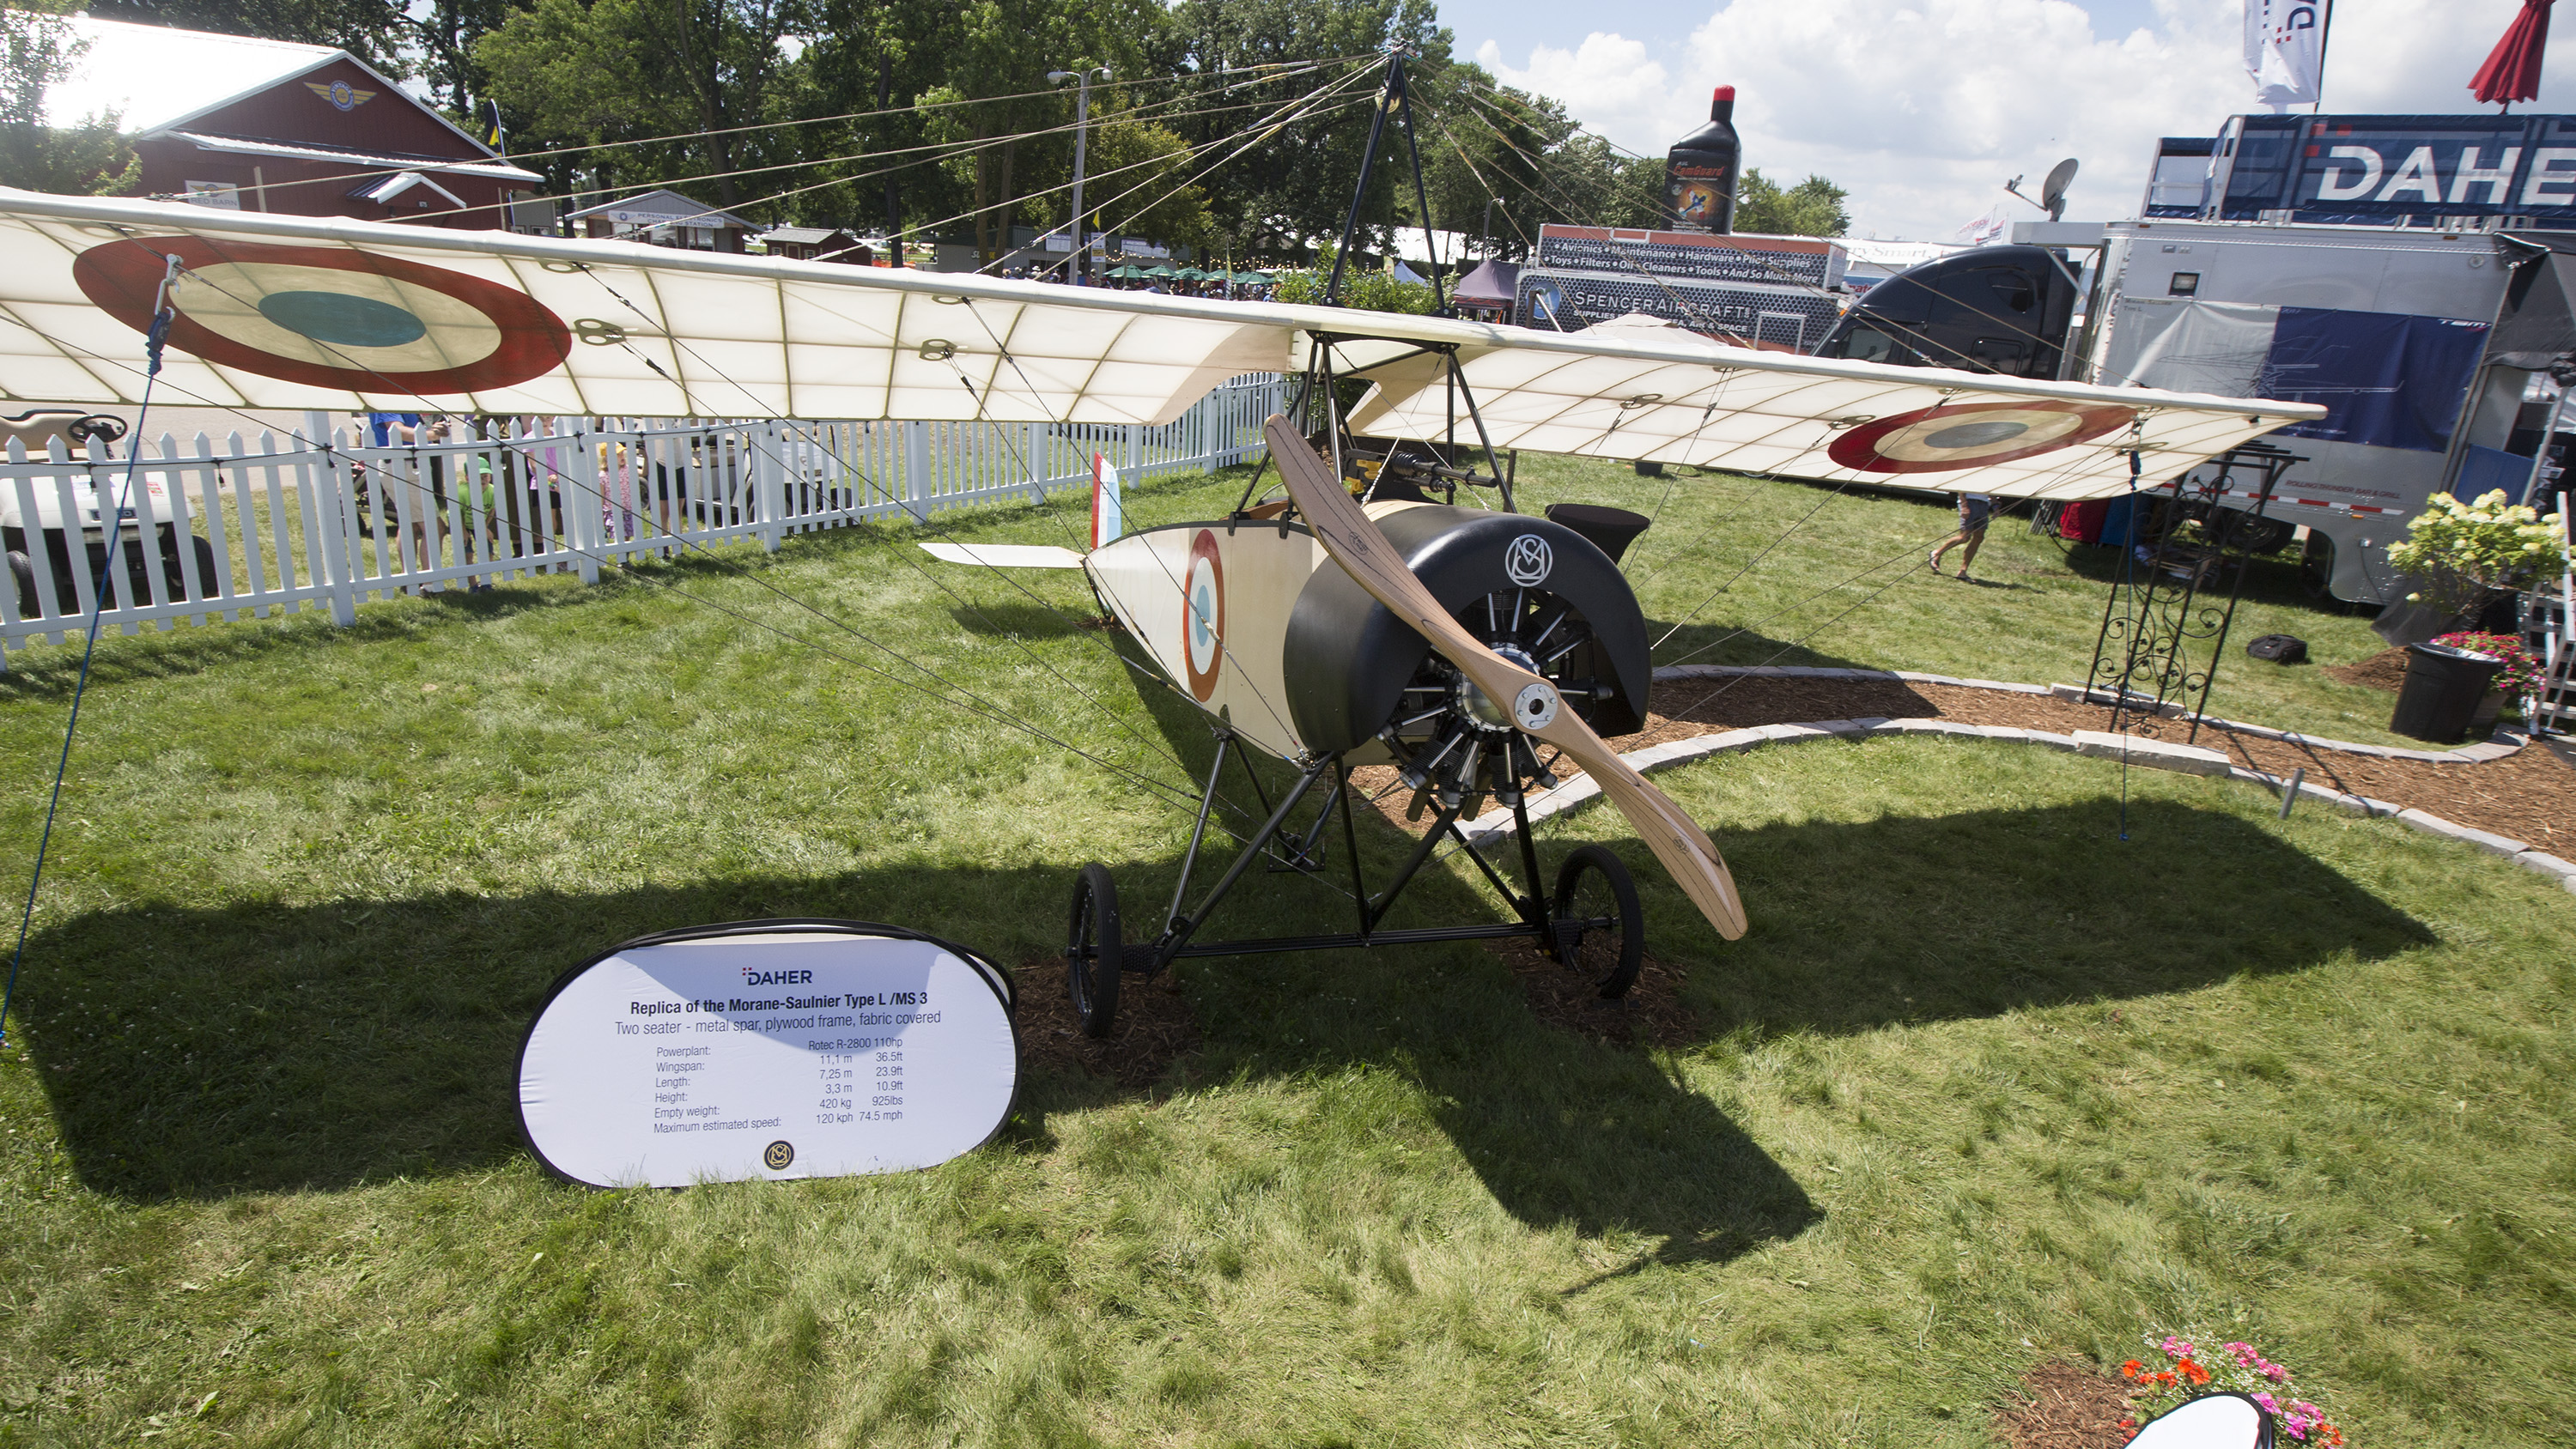 The near-replica of the Morane-Saulnier Type L/MS 3 was an attention-getting part of Daher's display at EAA AirVenture. Jim Moore photo. 